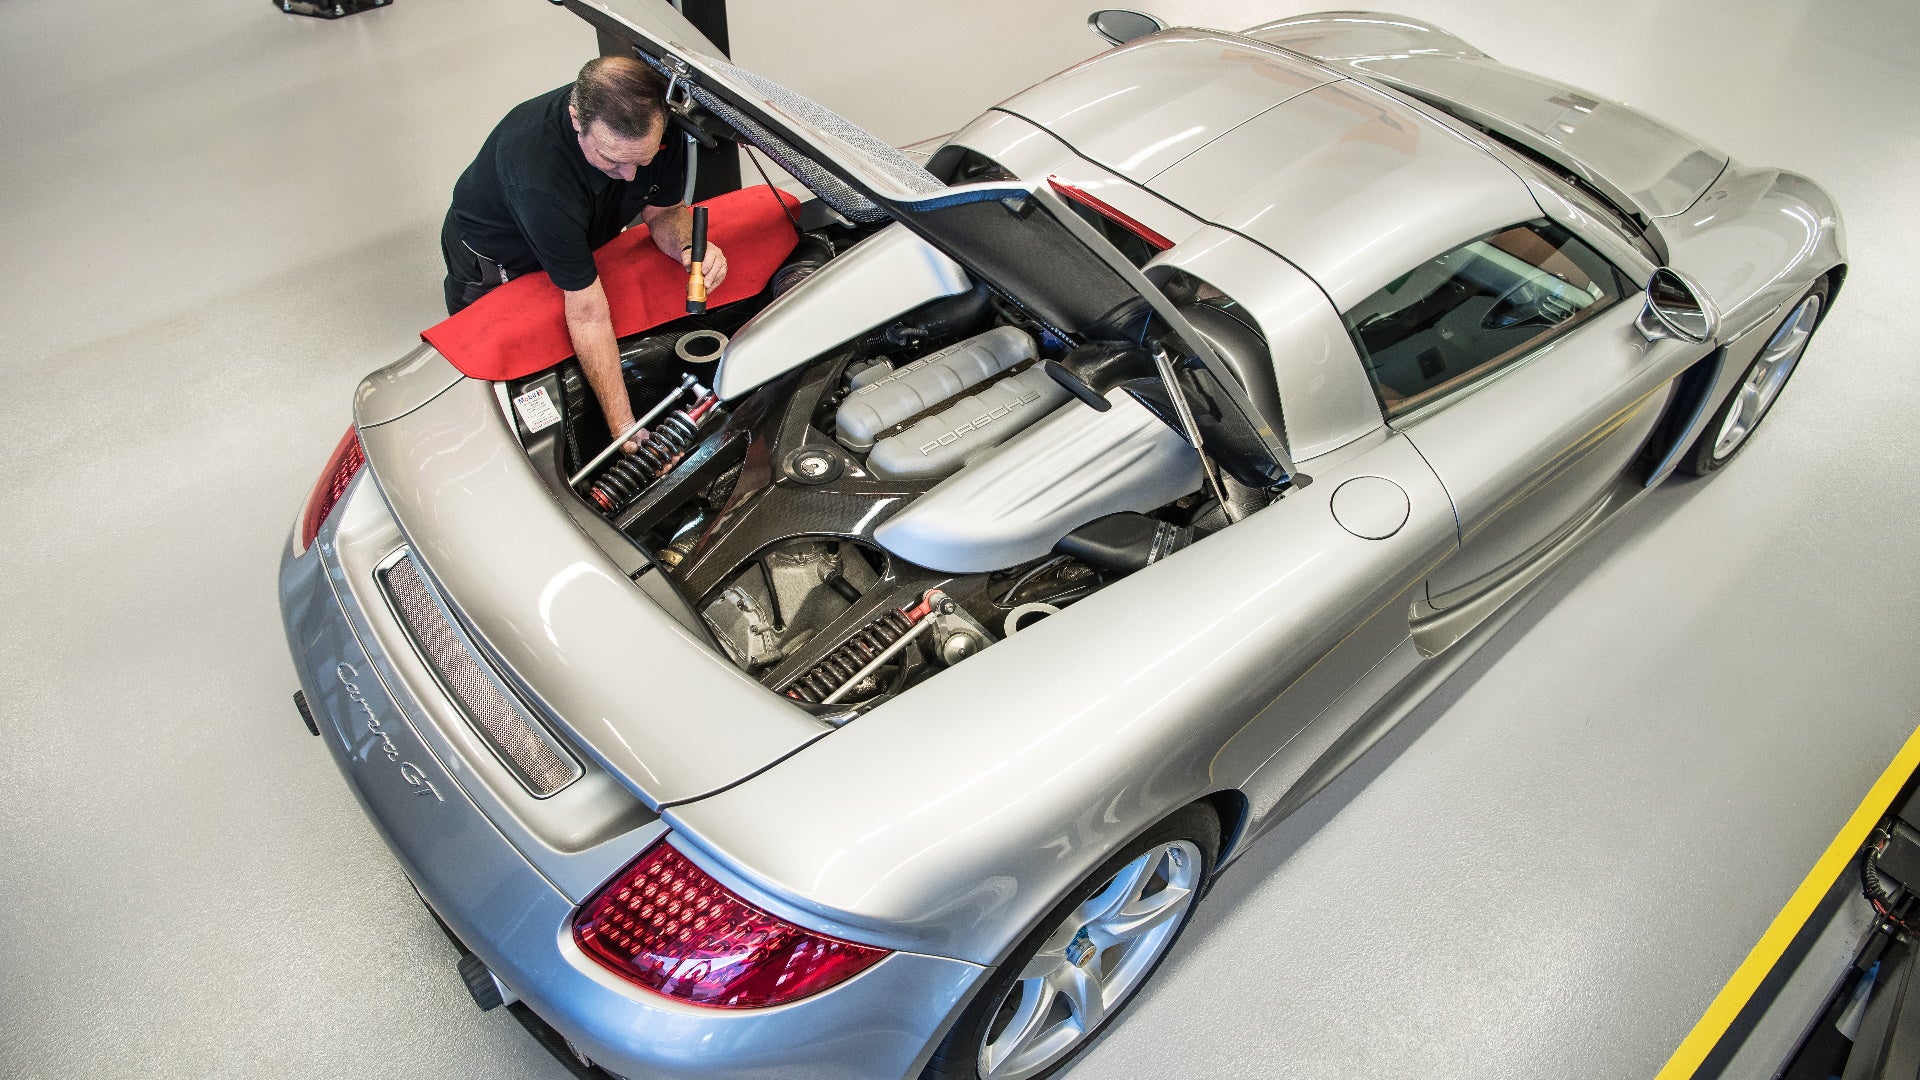 This Porsche Carrera GT Used to Train Technicians Has Been Disassembled 78  Times